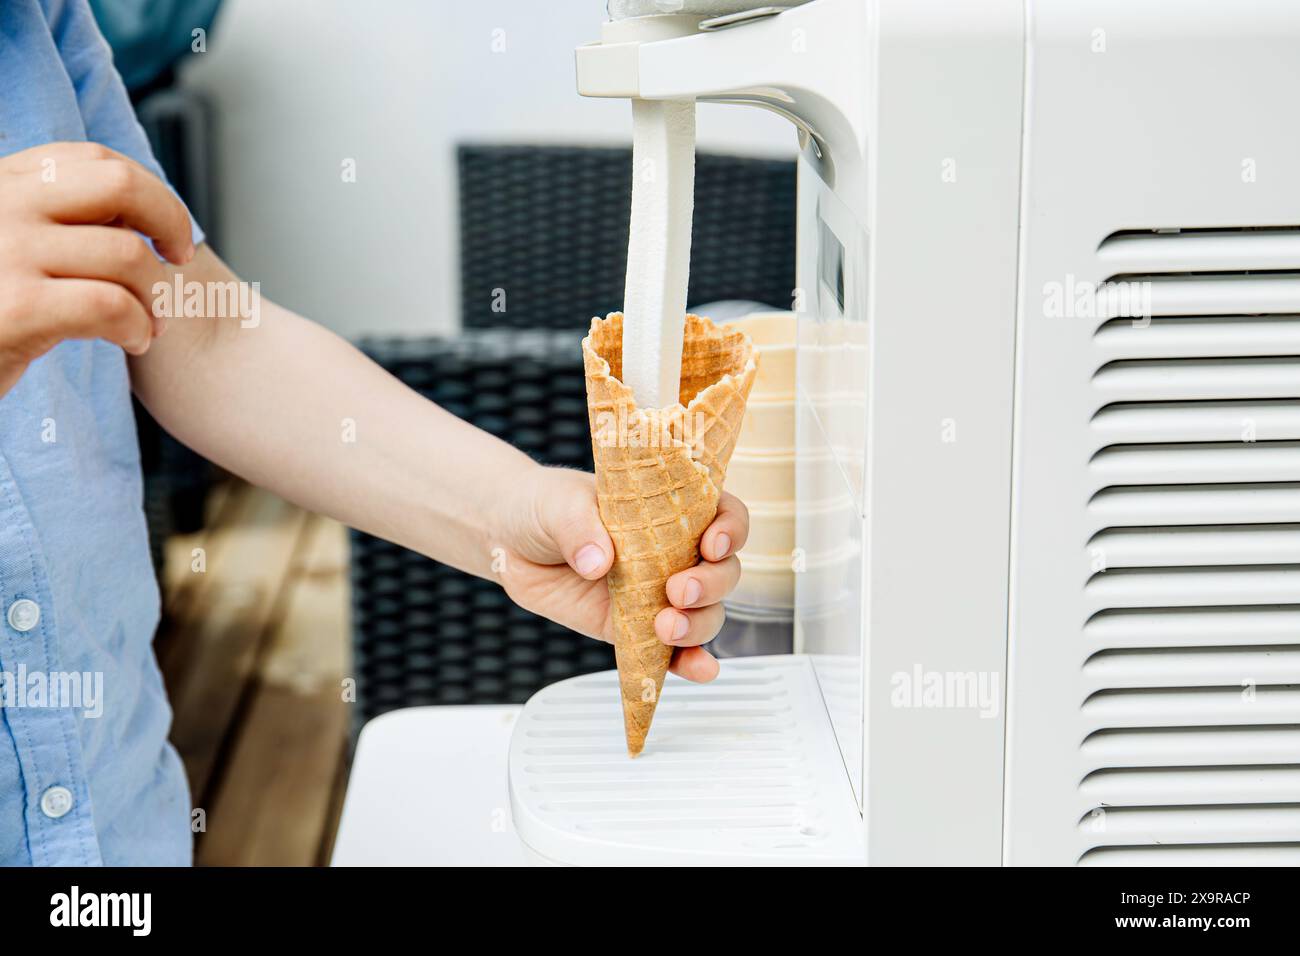 Close up view of child hand using home use ice cream maker machine. Making soft serve ice cream and pouring in cone outdoors in garden yard. Stock Photo